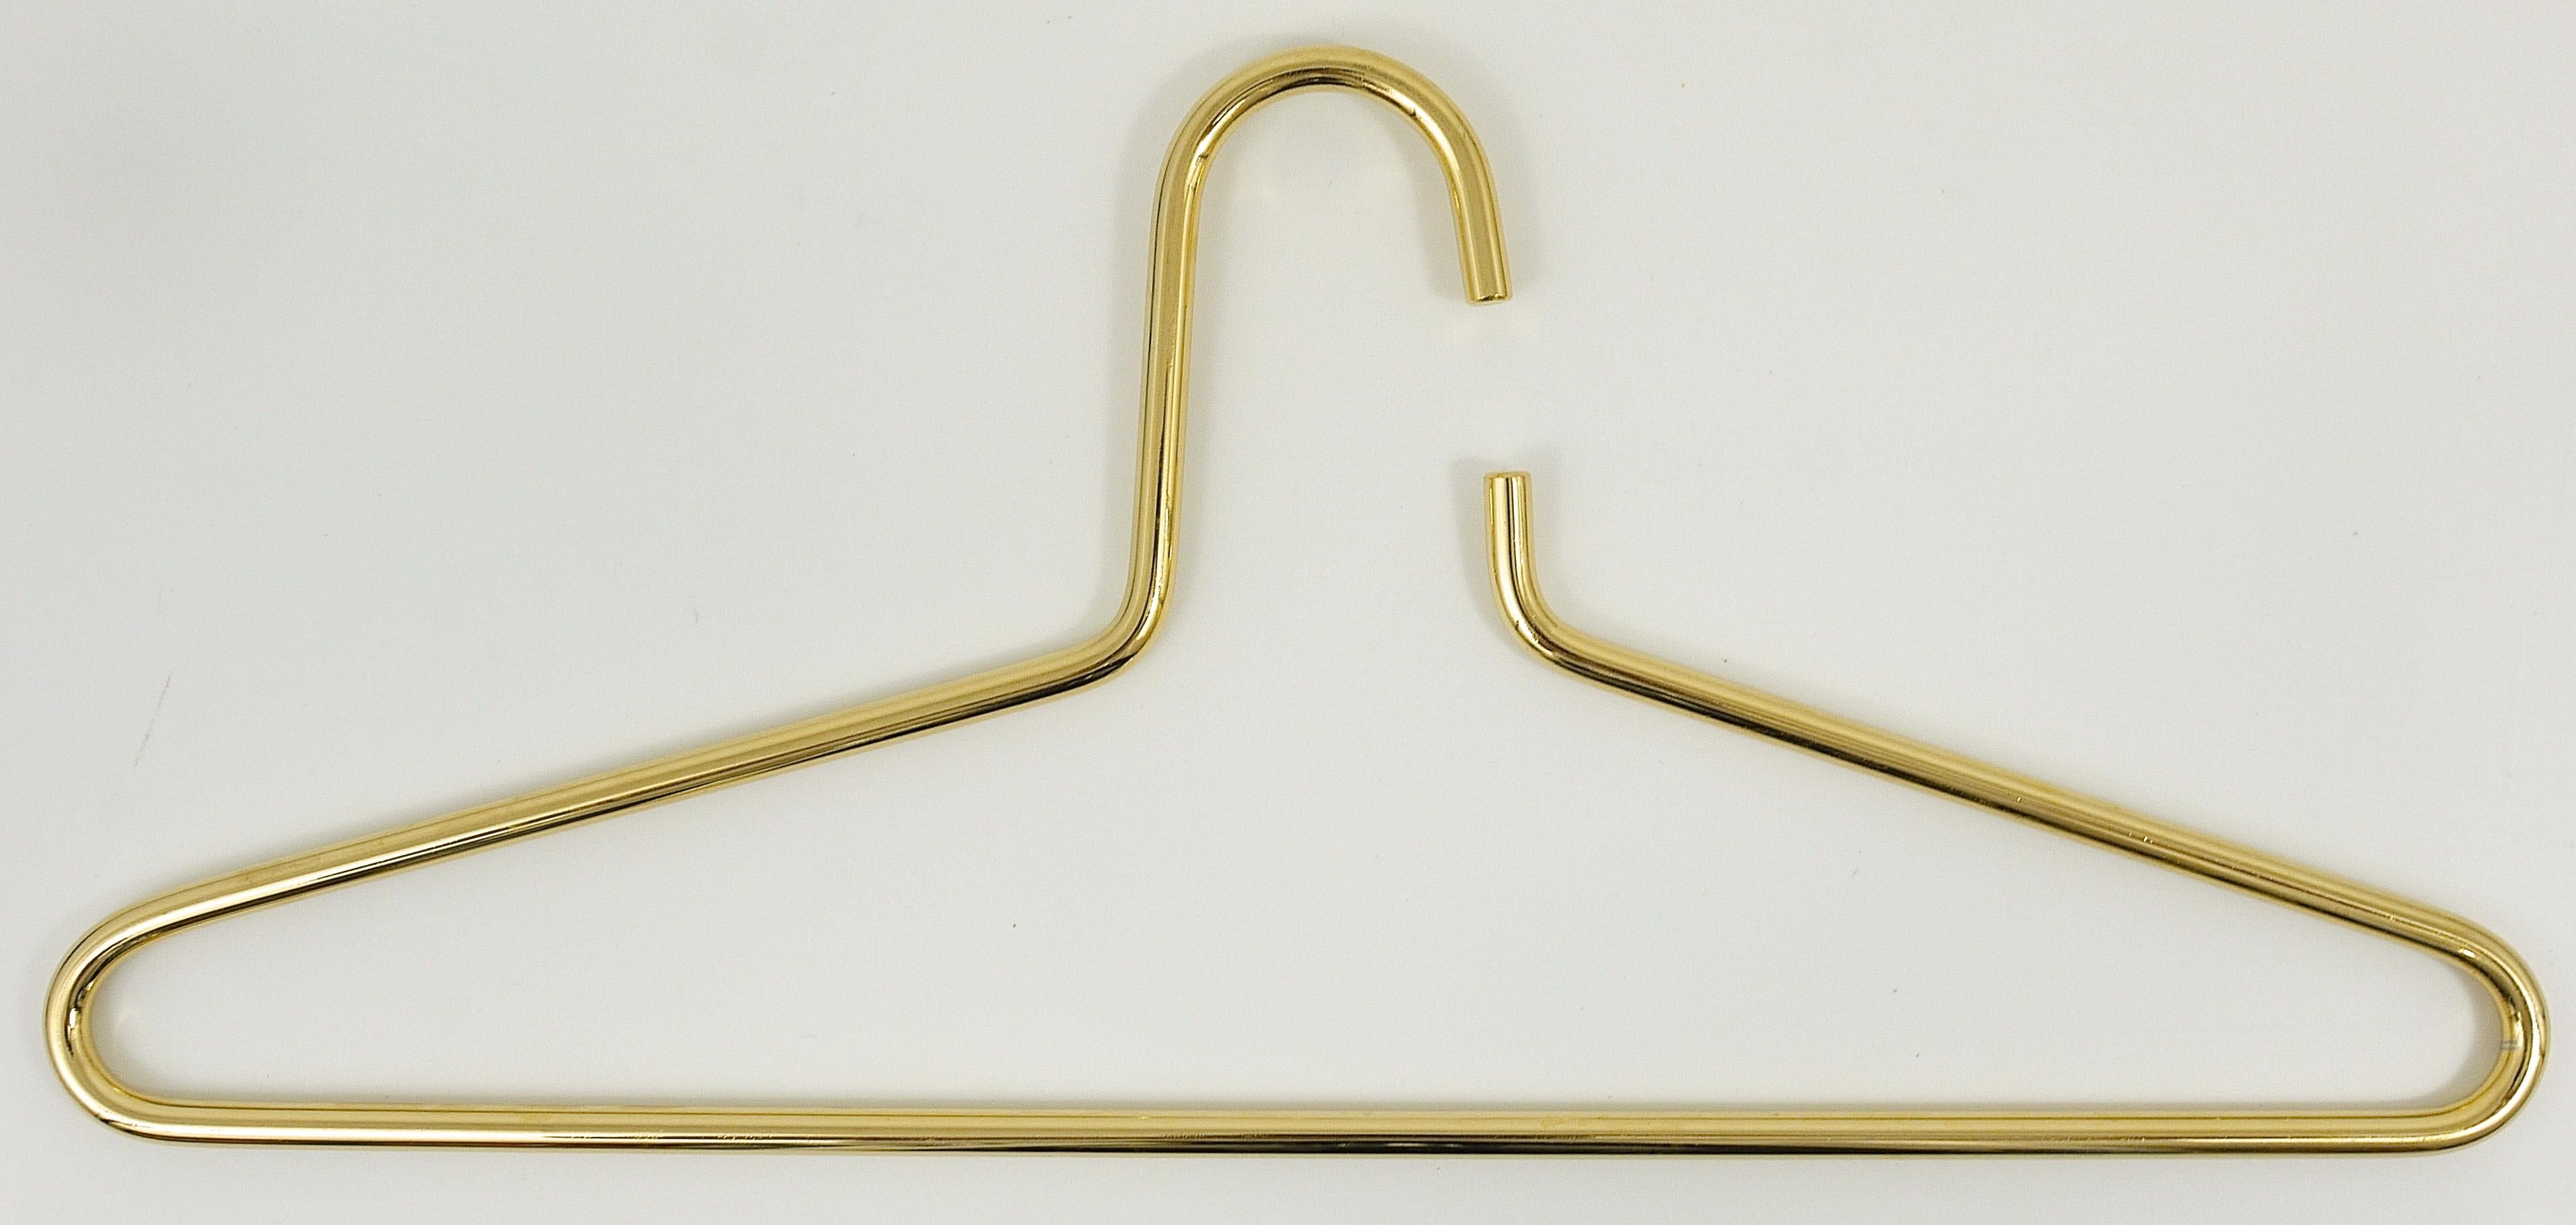 Up to 12 Austrian Modernist Solid Gold-Plated Coat Hangers from the 1970s For Sale 2